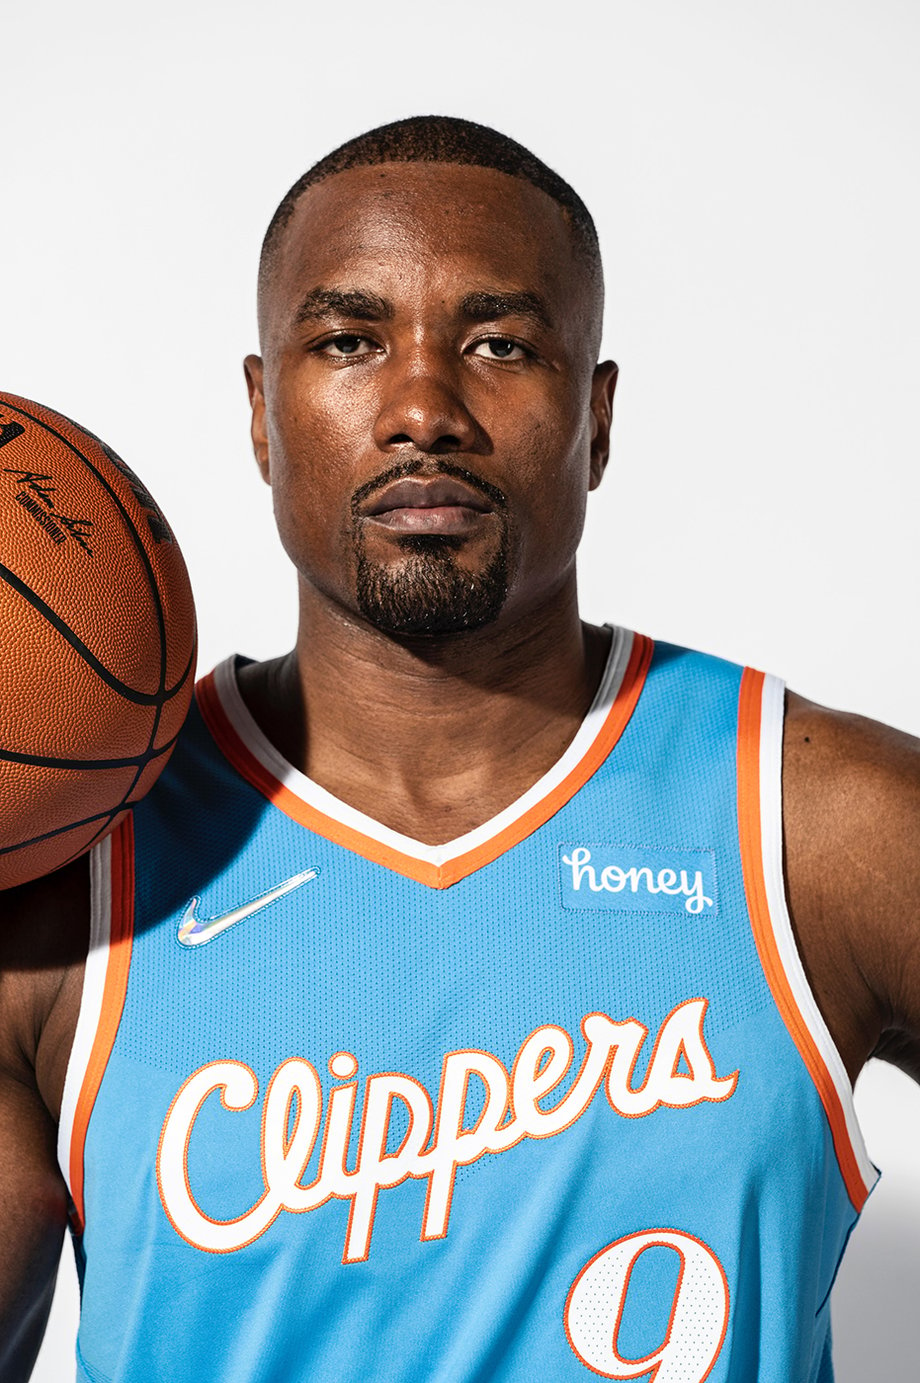 Power Forward Serge Ibaka of the LA Clippers basketball team shot by Erik Isakson